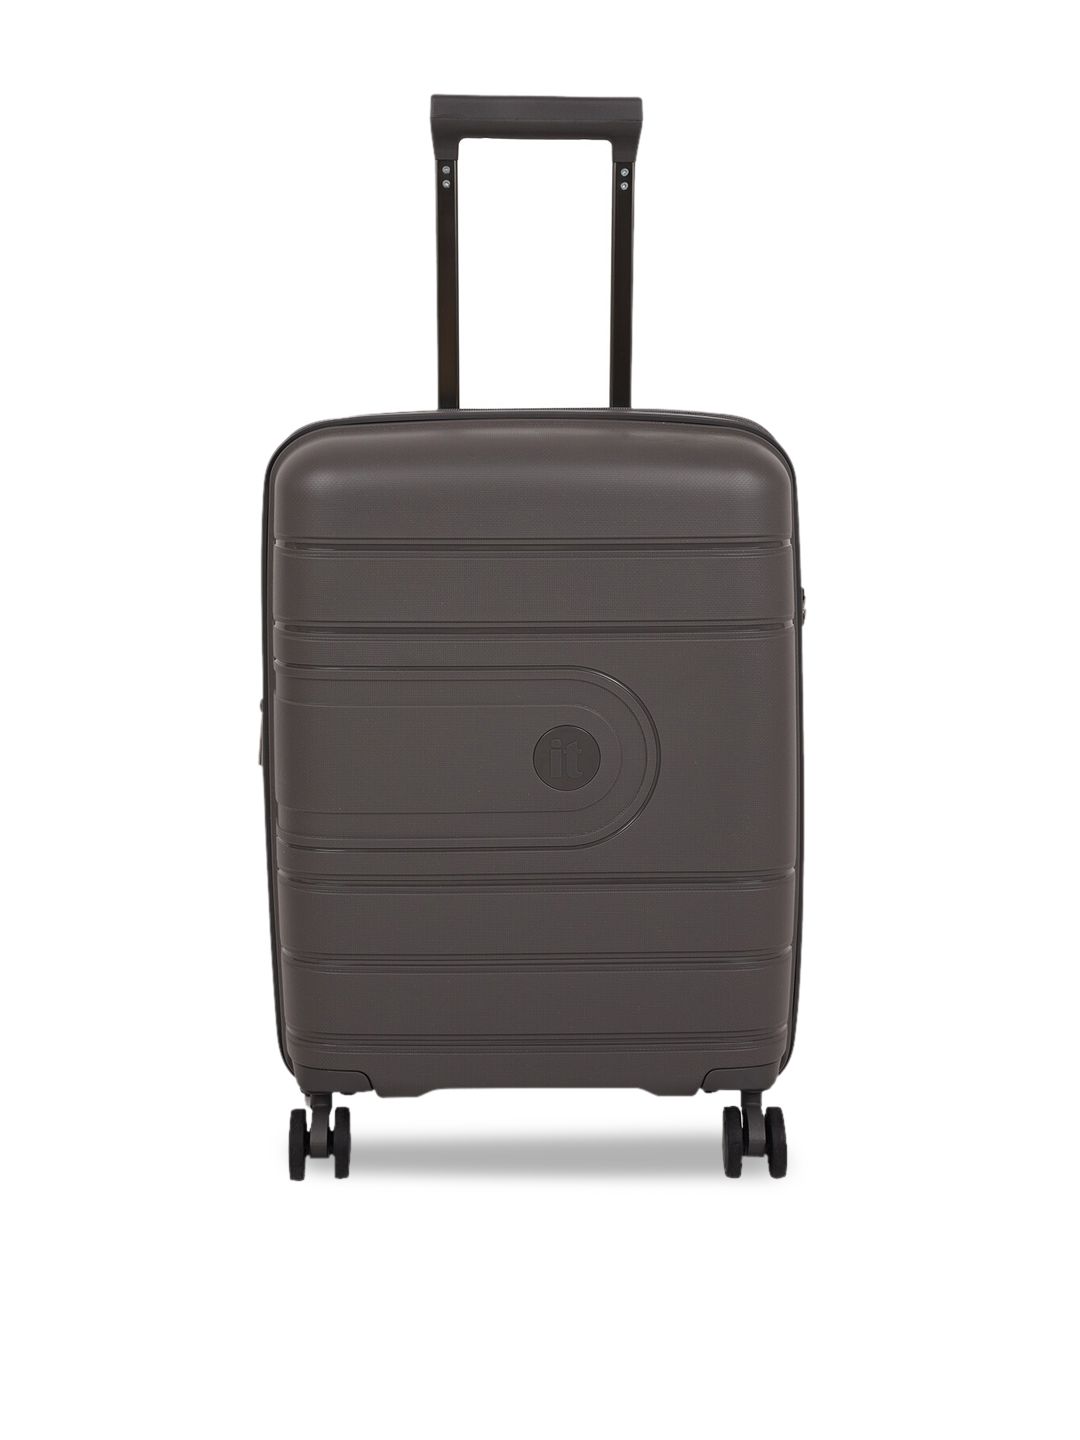 IT luggage Charcoal Grey Hard-Sided Trolley Price in India